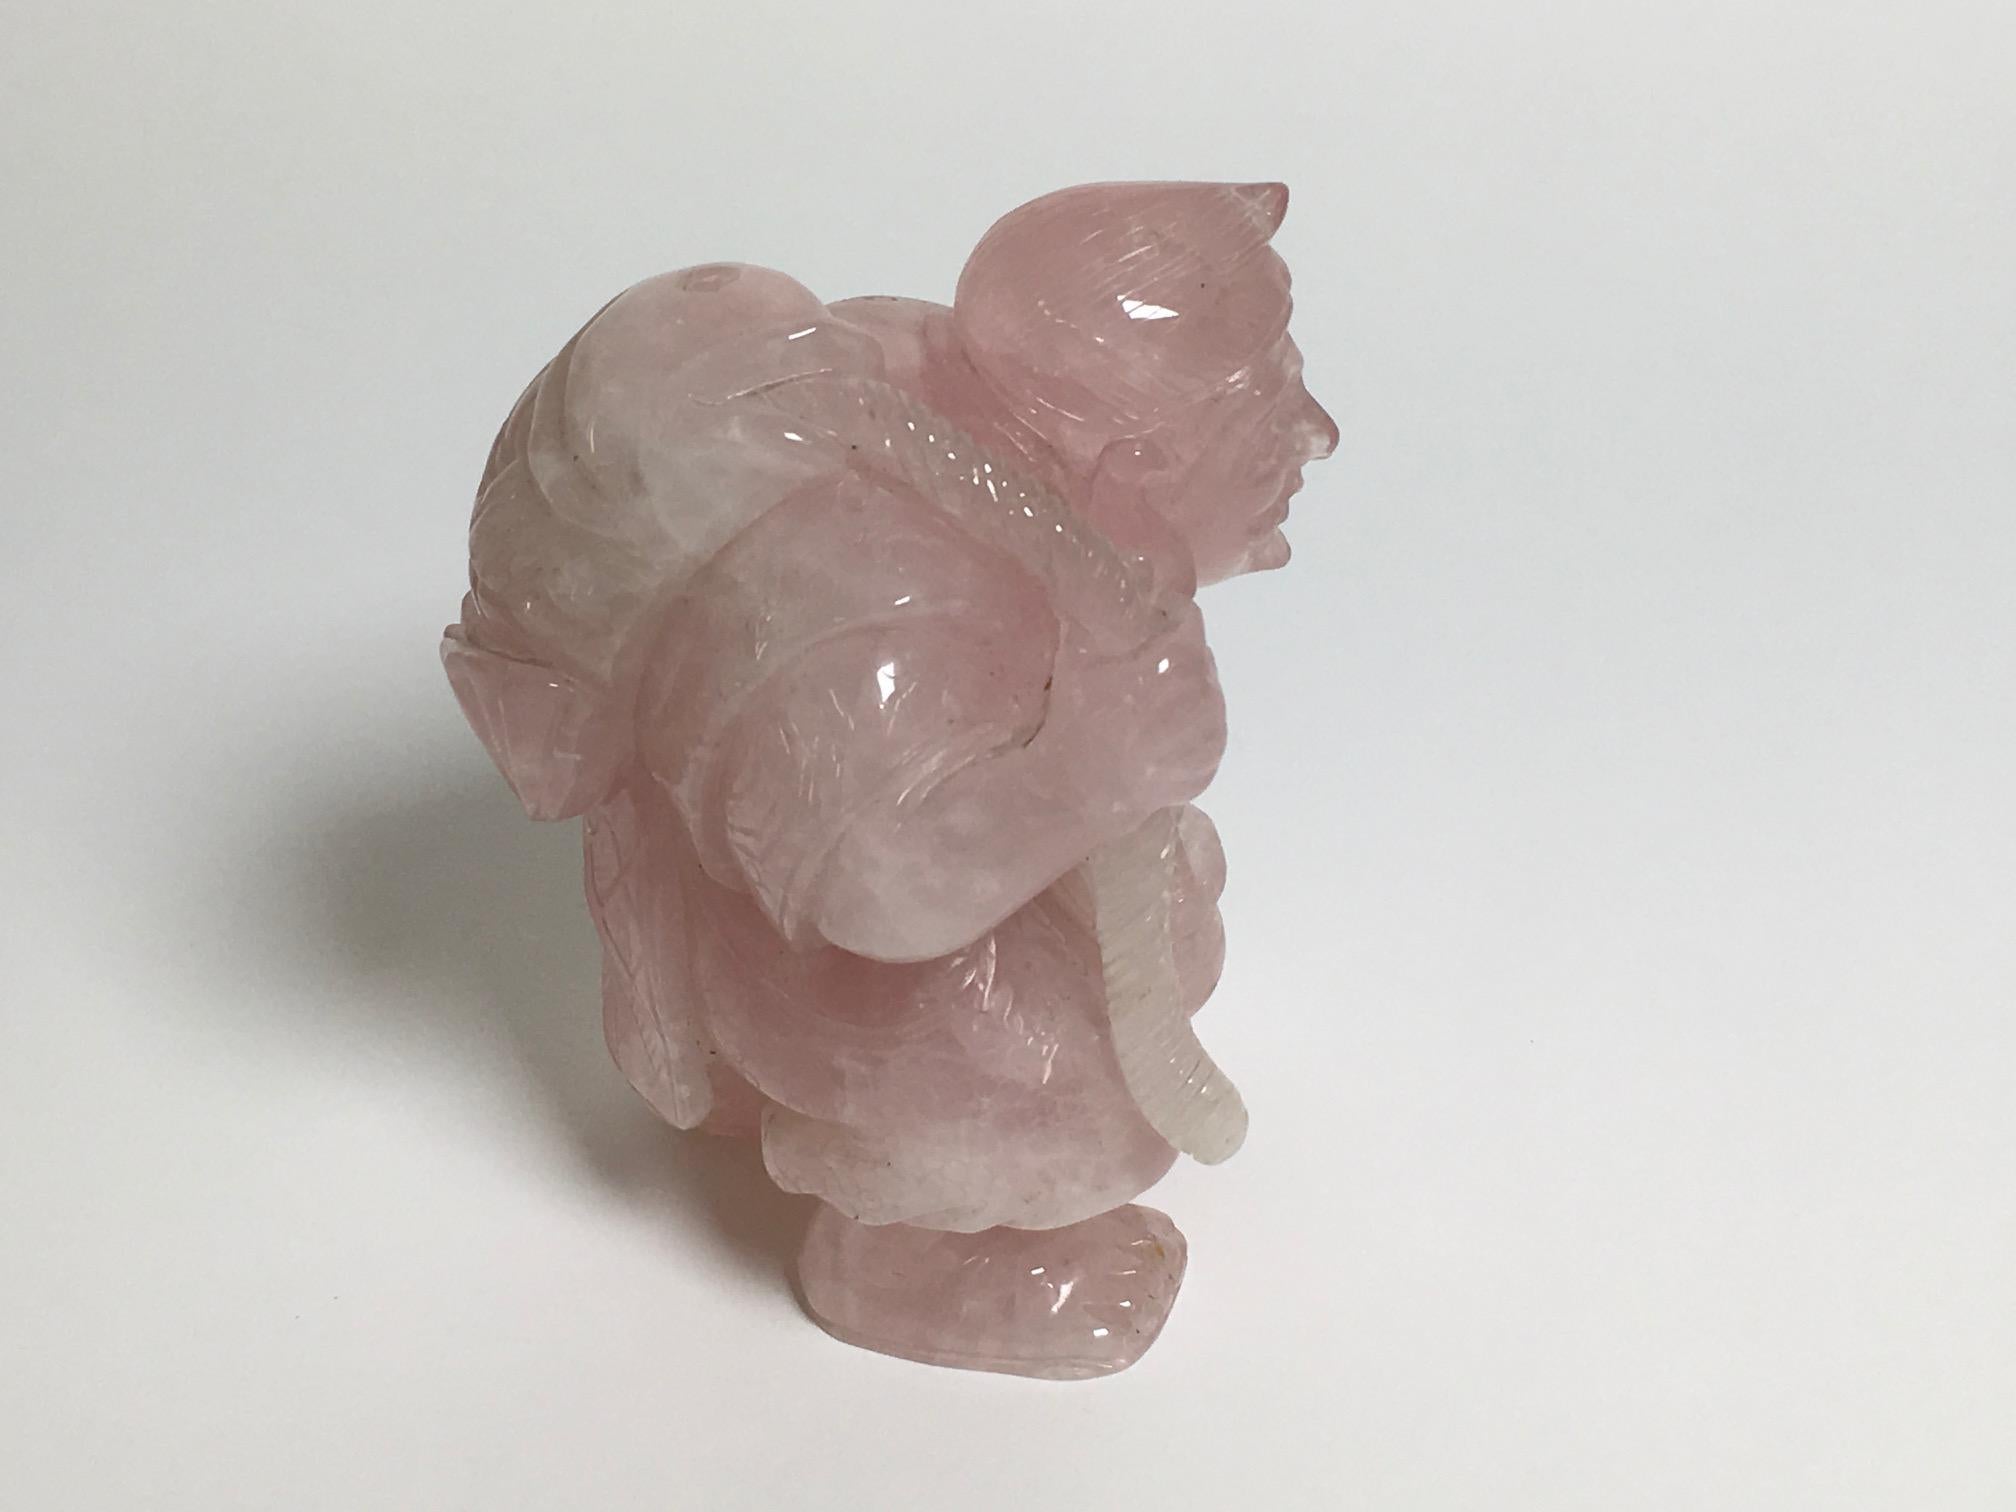 Beautiful carved rose quartz sculpture produced in China. Italian private collection.